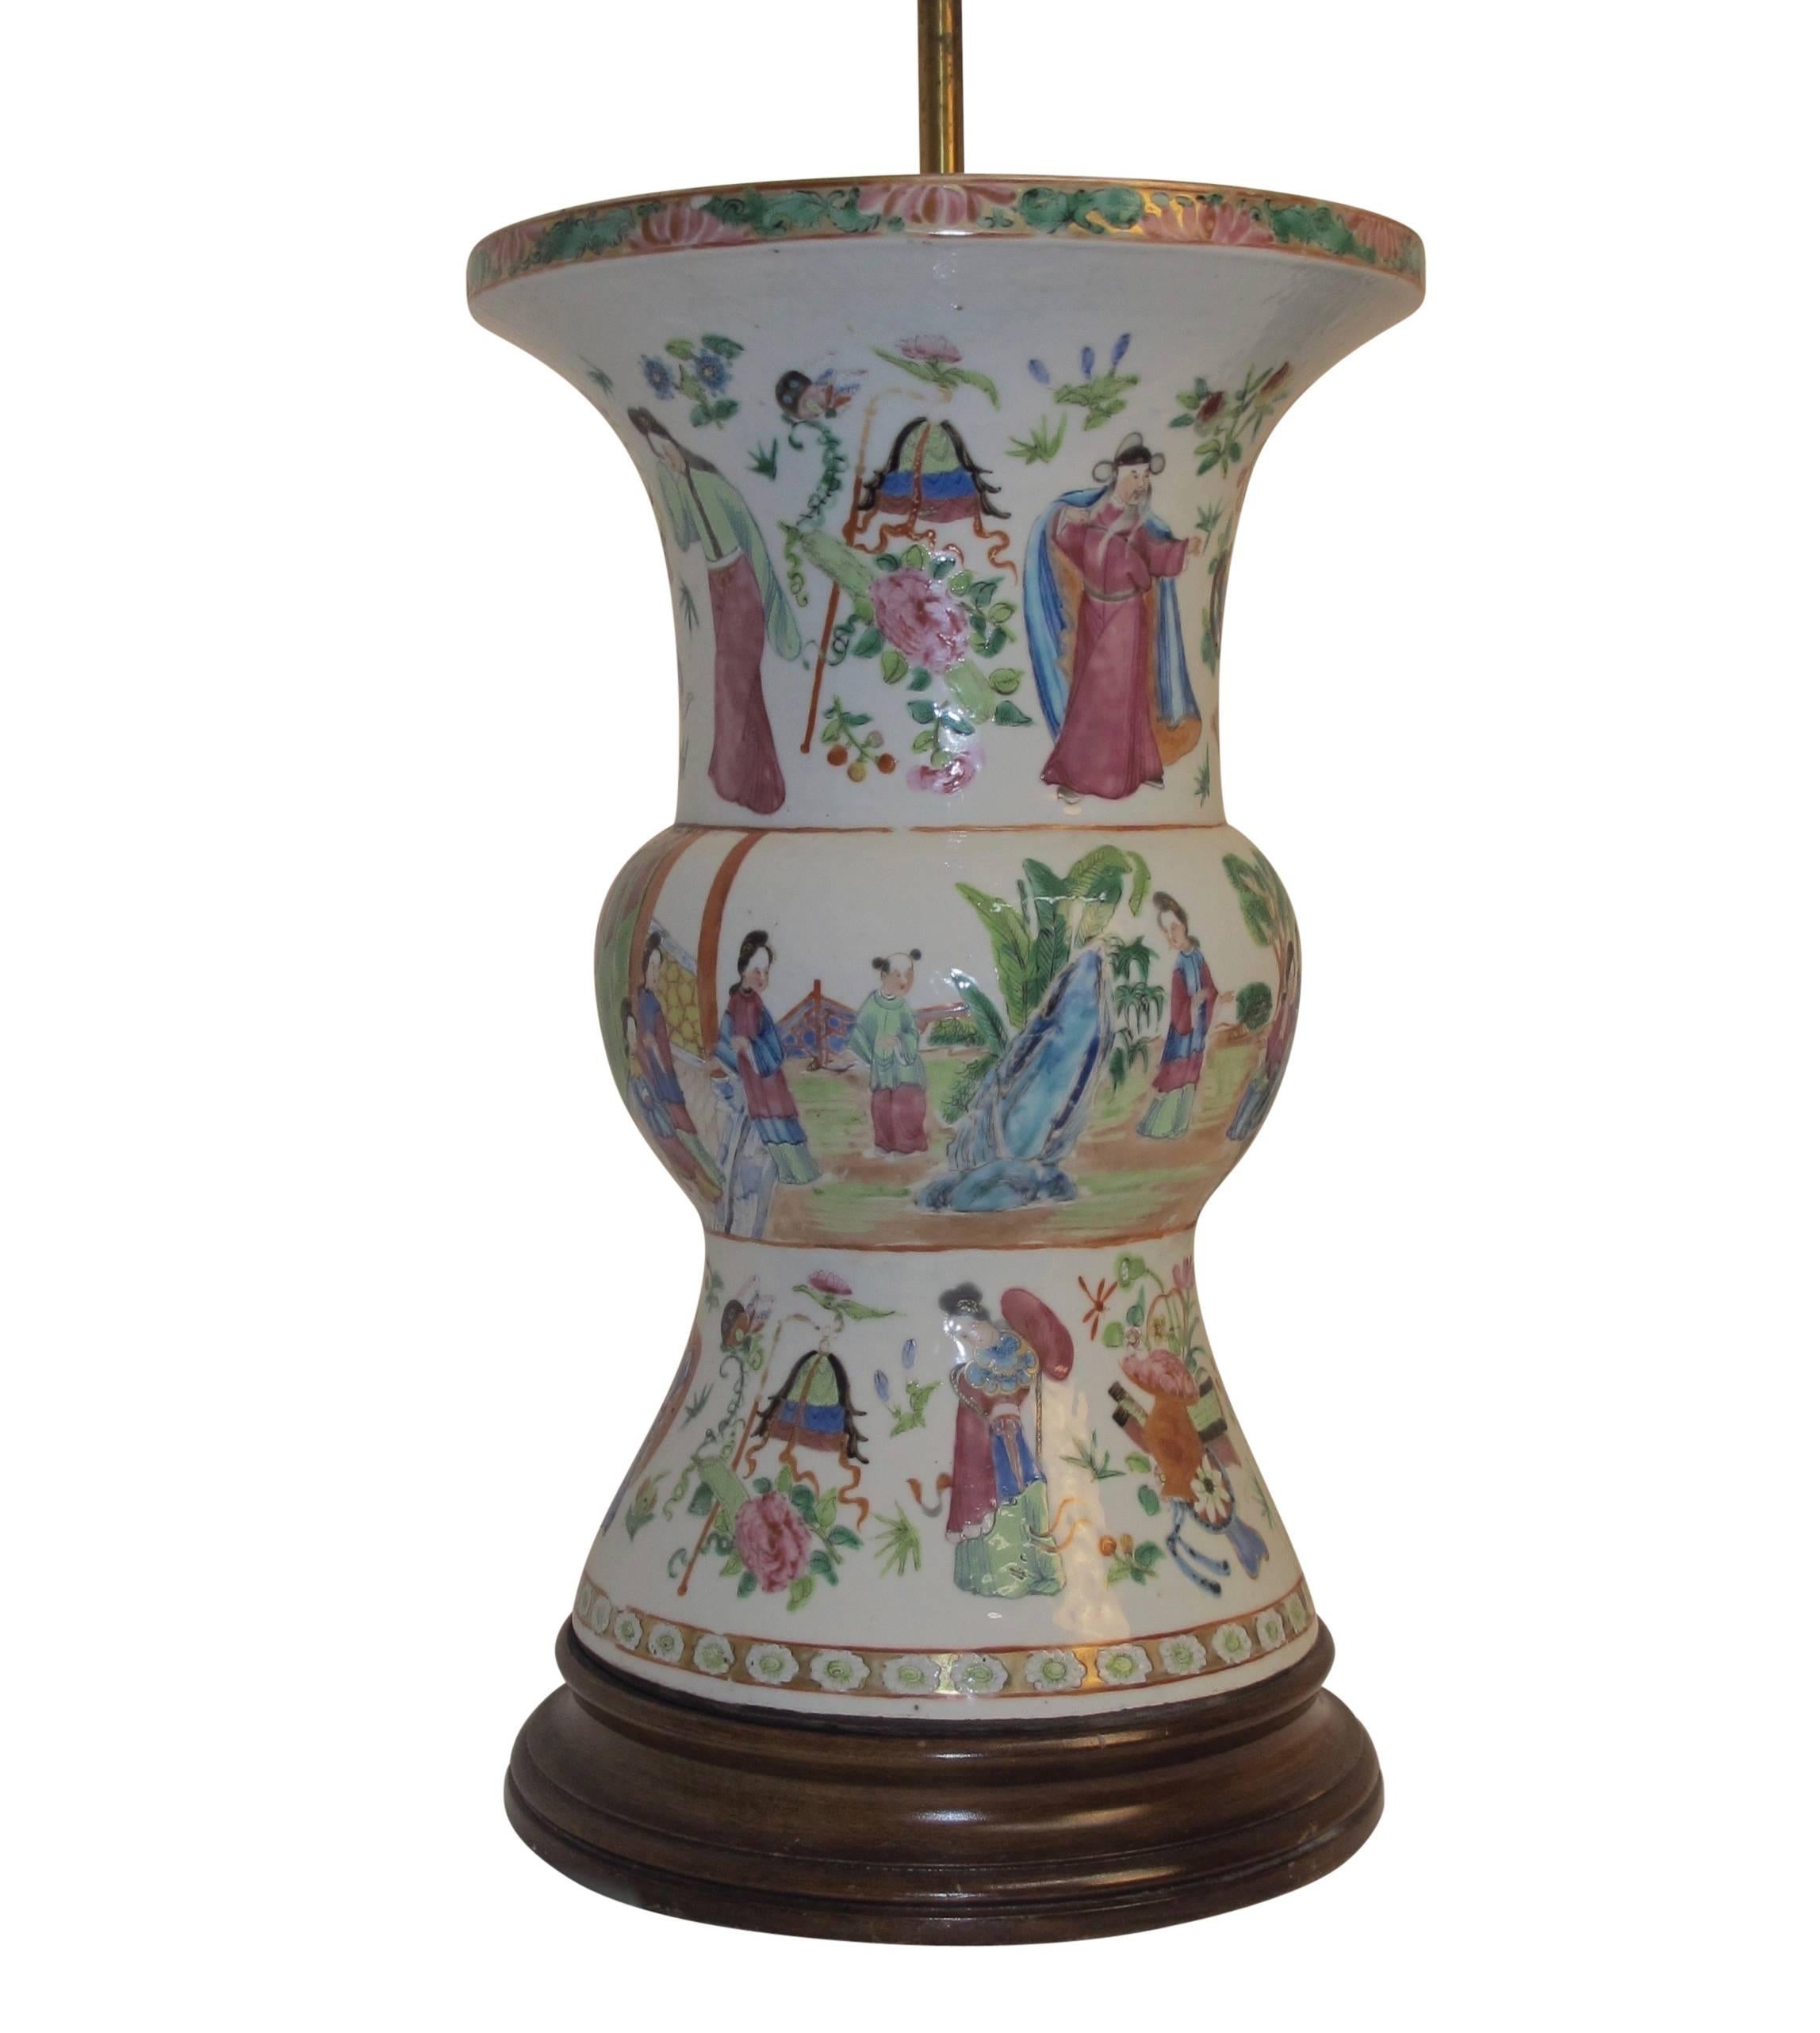 A famille rose pattern vase with hand painted figures, converted to a table lamp, China, mid-19th century.
Shade not included.